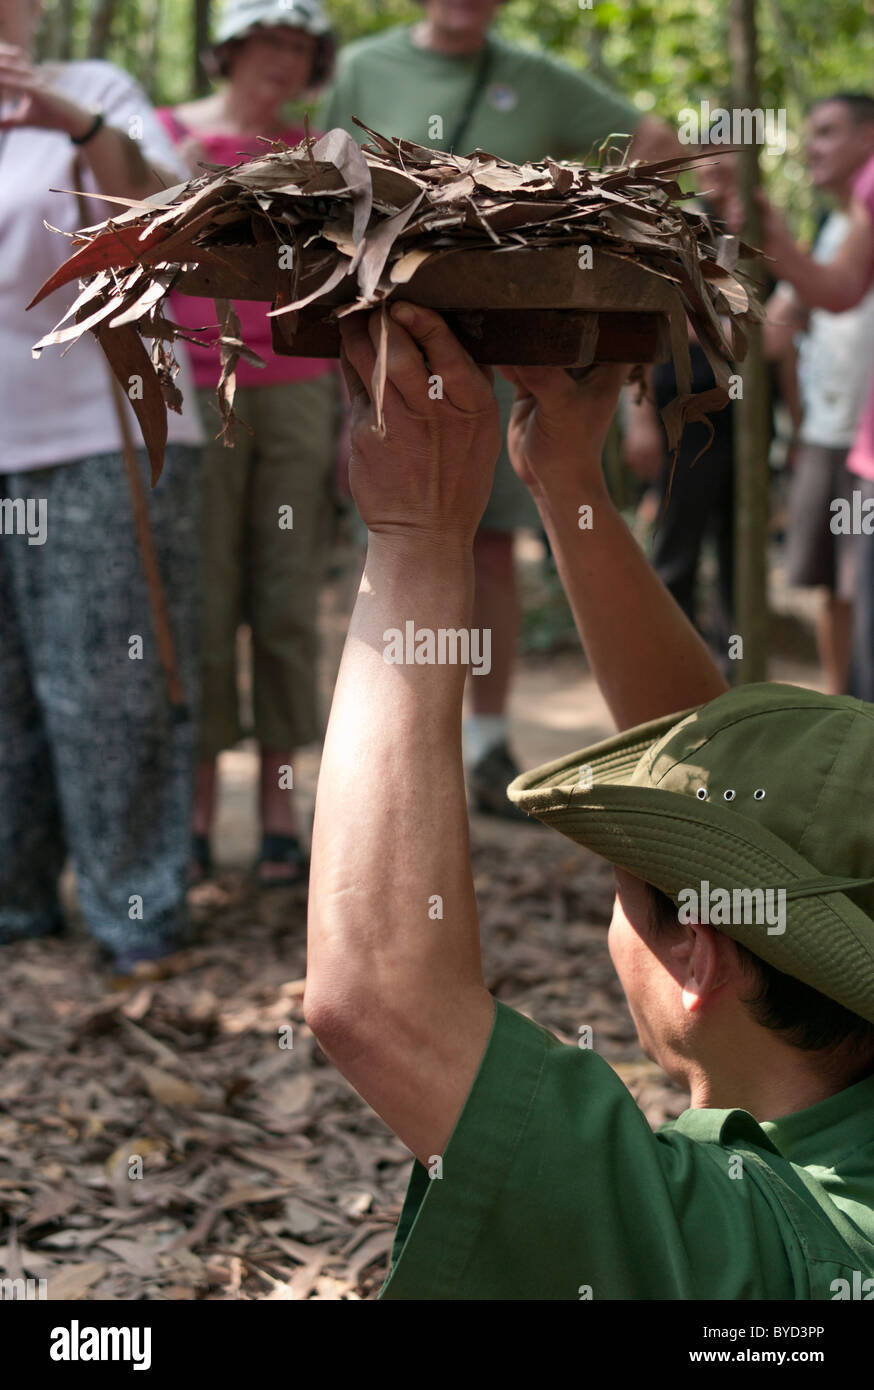 Cu Chi Tunnels Vietnam, used during the War. Guide demonstrates access to tunnels before tourists. Stock Photo